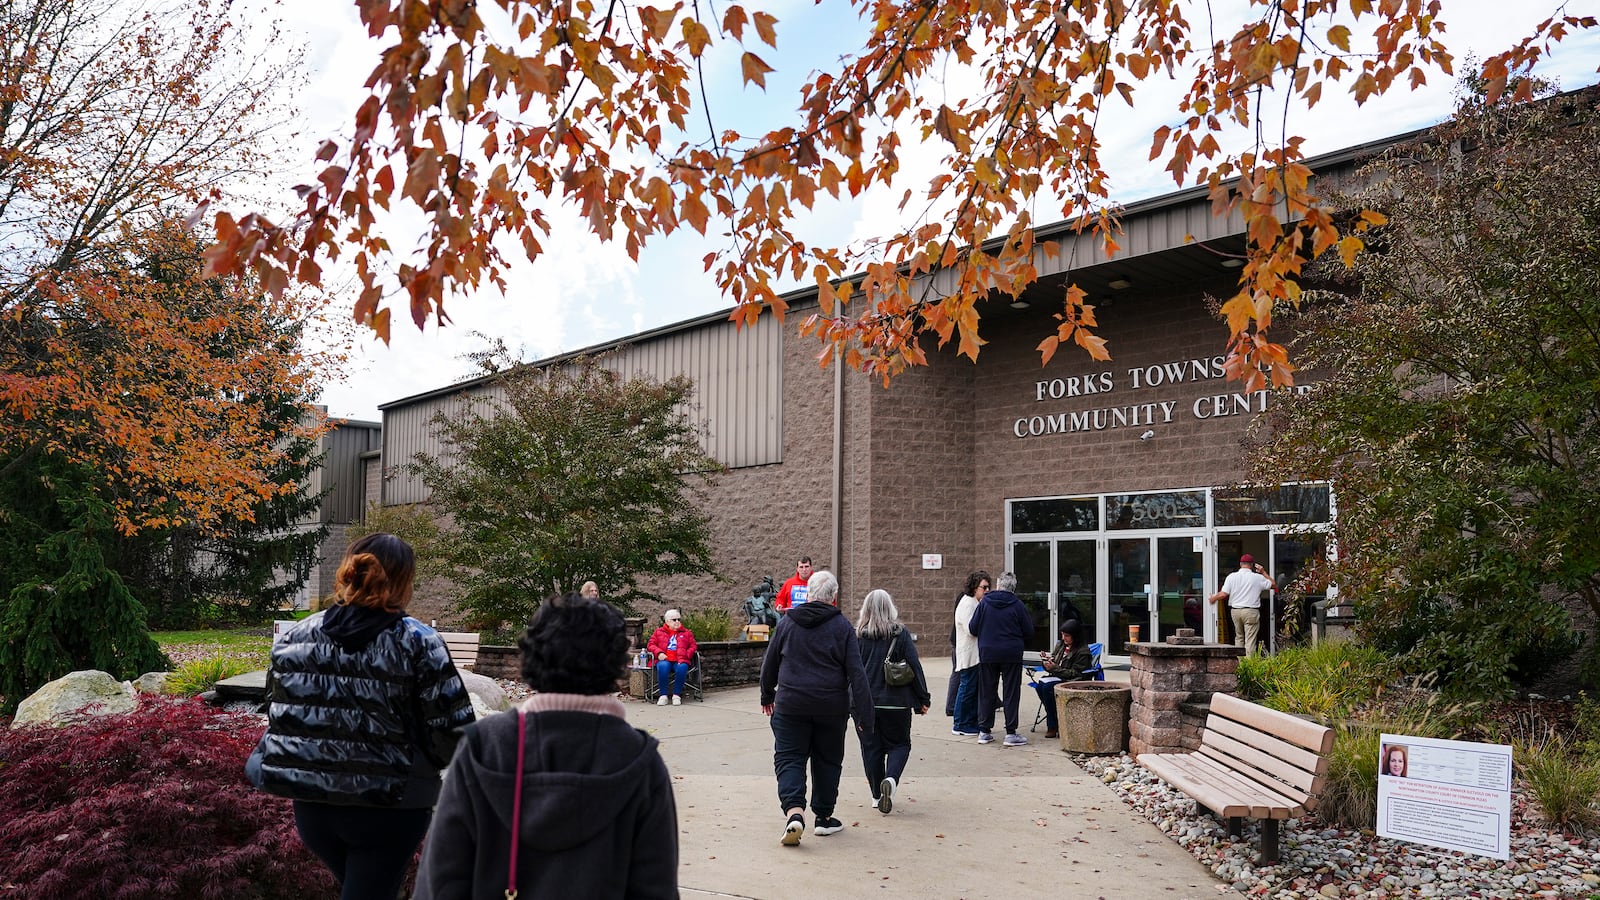 A small crowd of people walk toward the front entrance of a brick community center with fall foliage near the top of the photo.